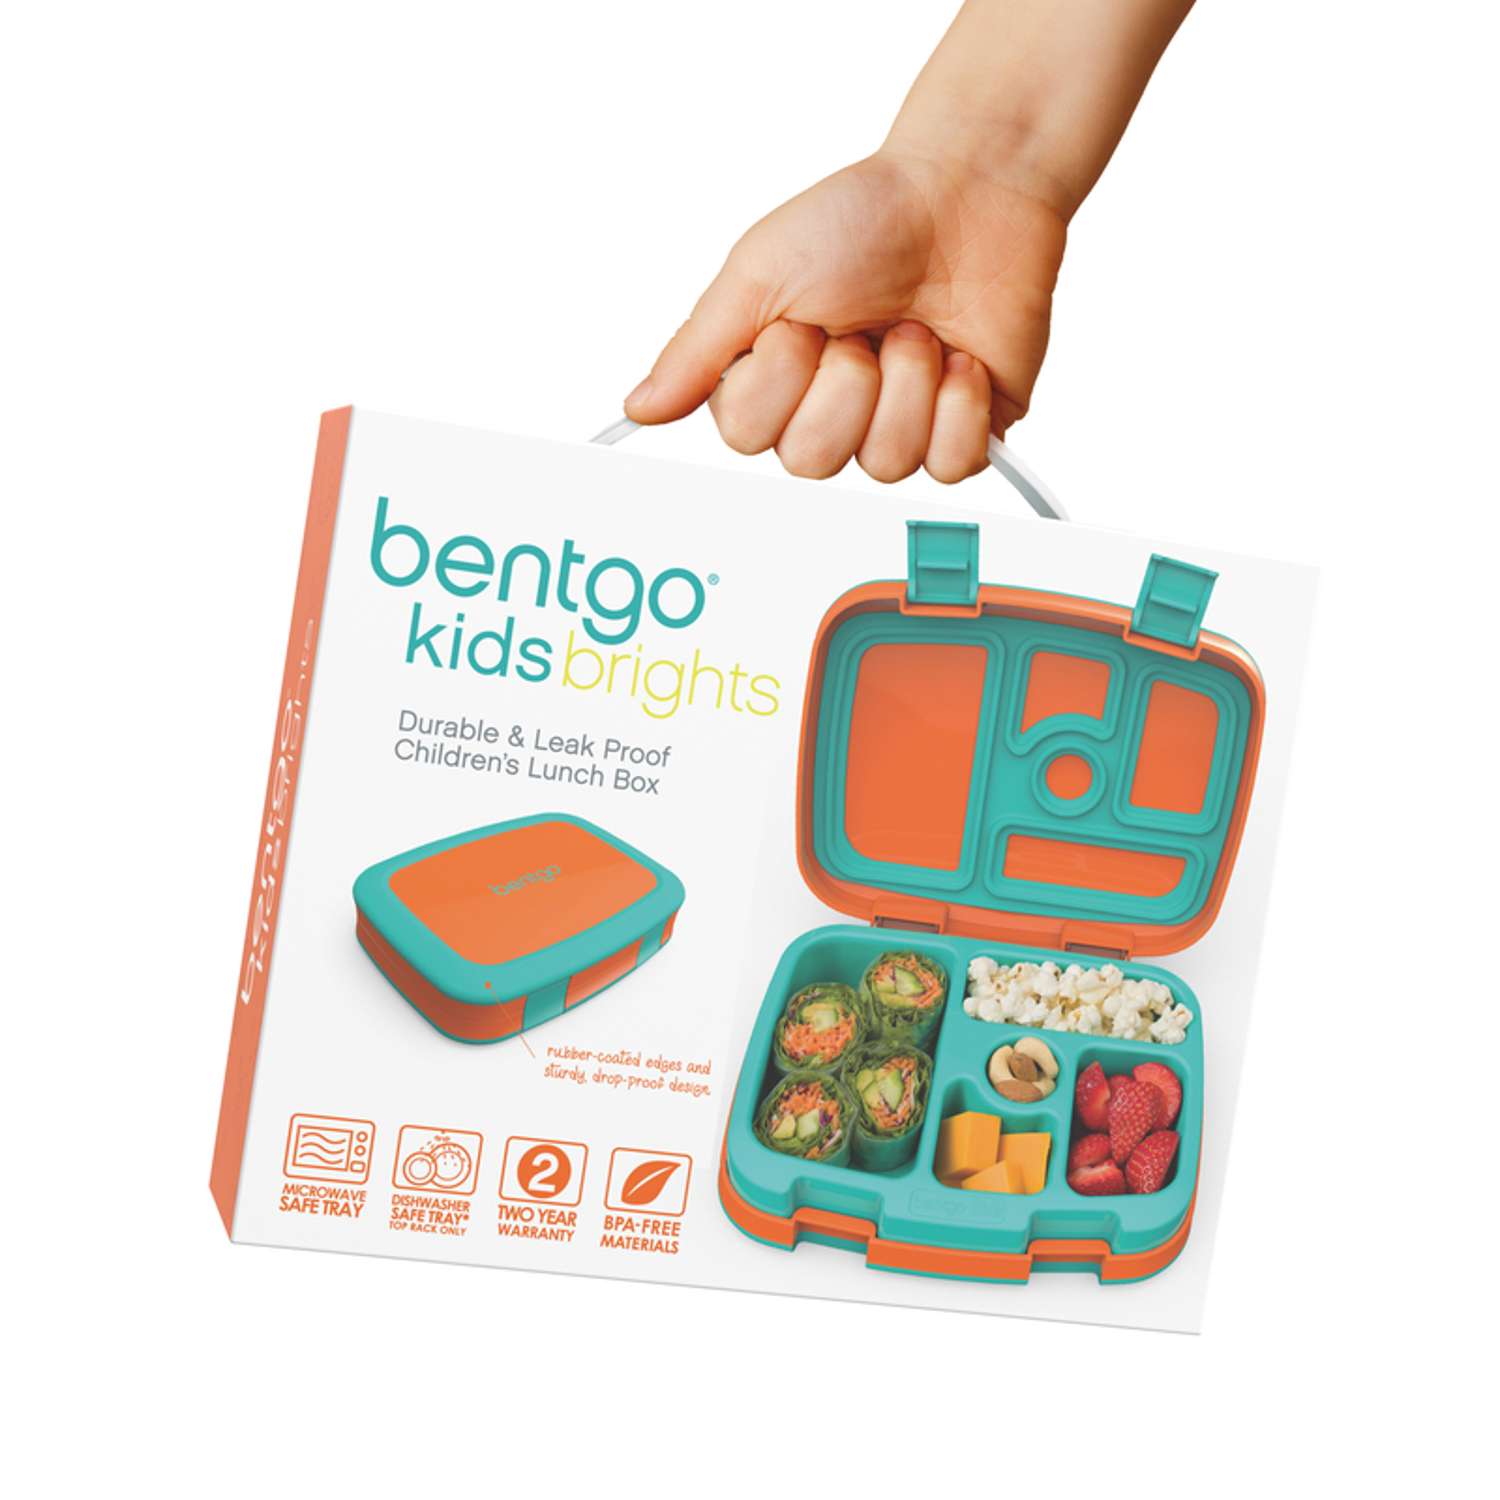 Smiggle - Bright Side Bentolu Lunch Set - Dinossi - Same Day and Free  Delivery